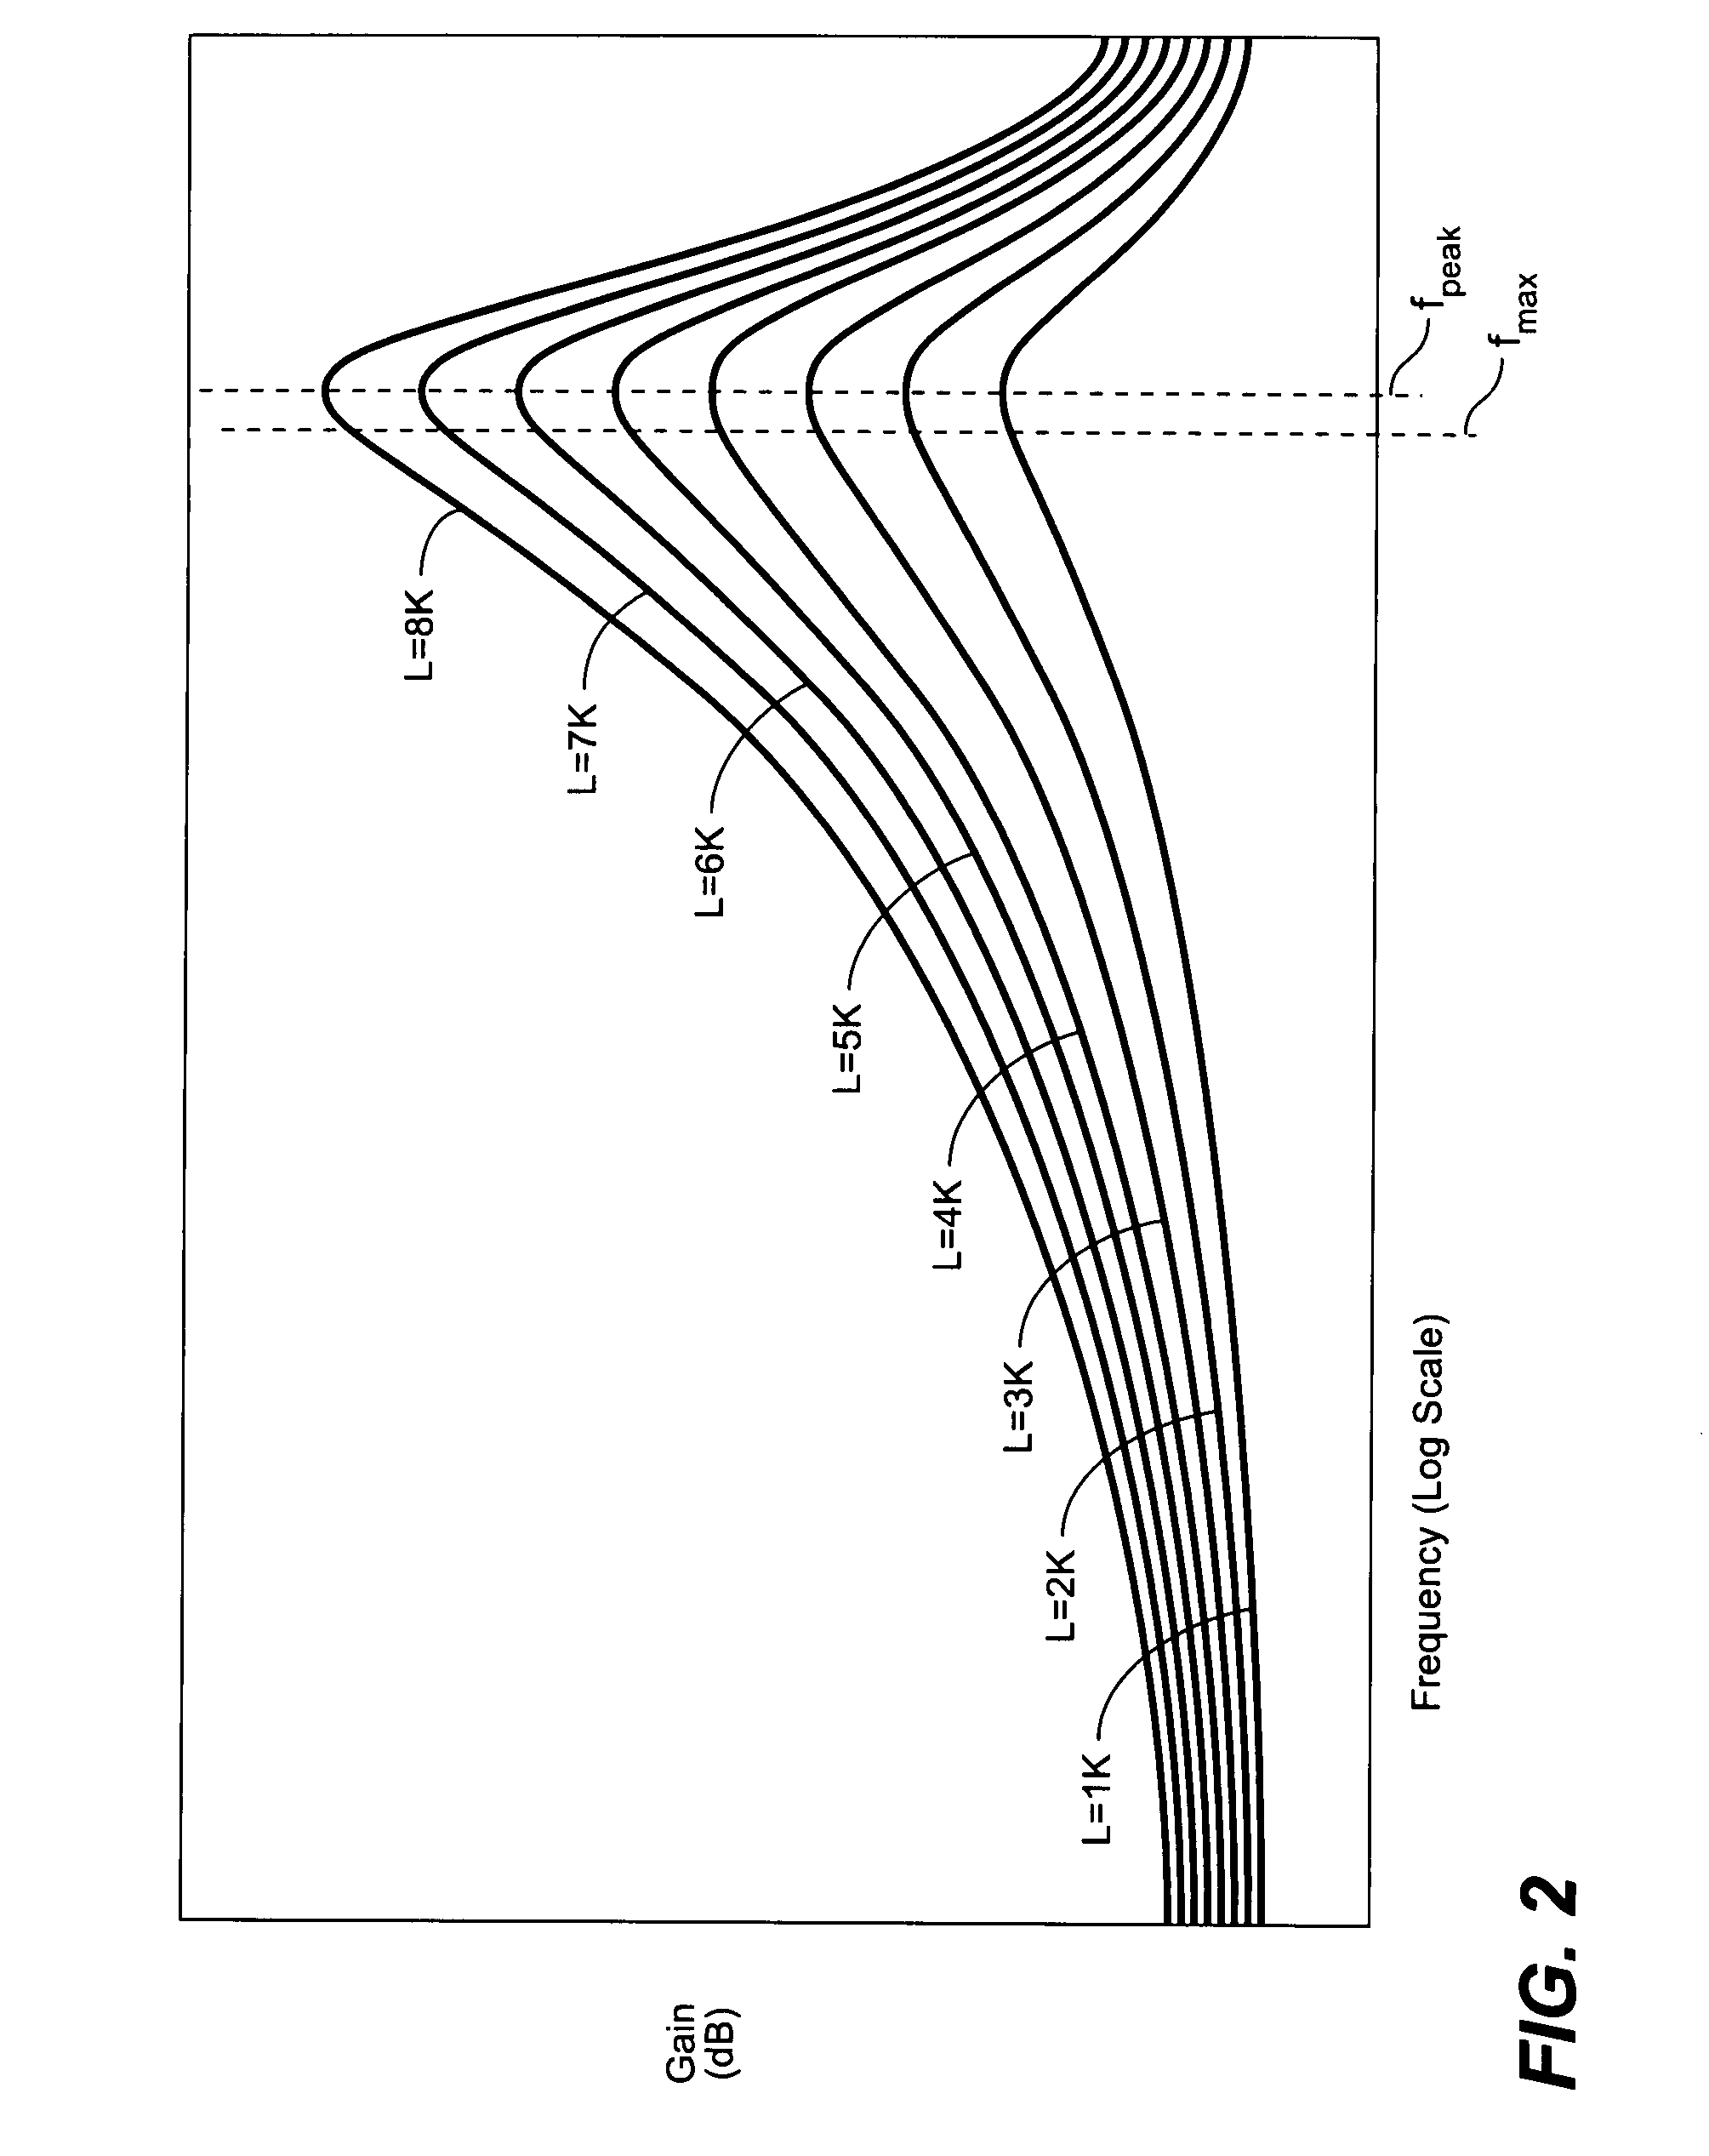 Multi-stage differential warping amplifier and method